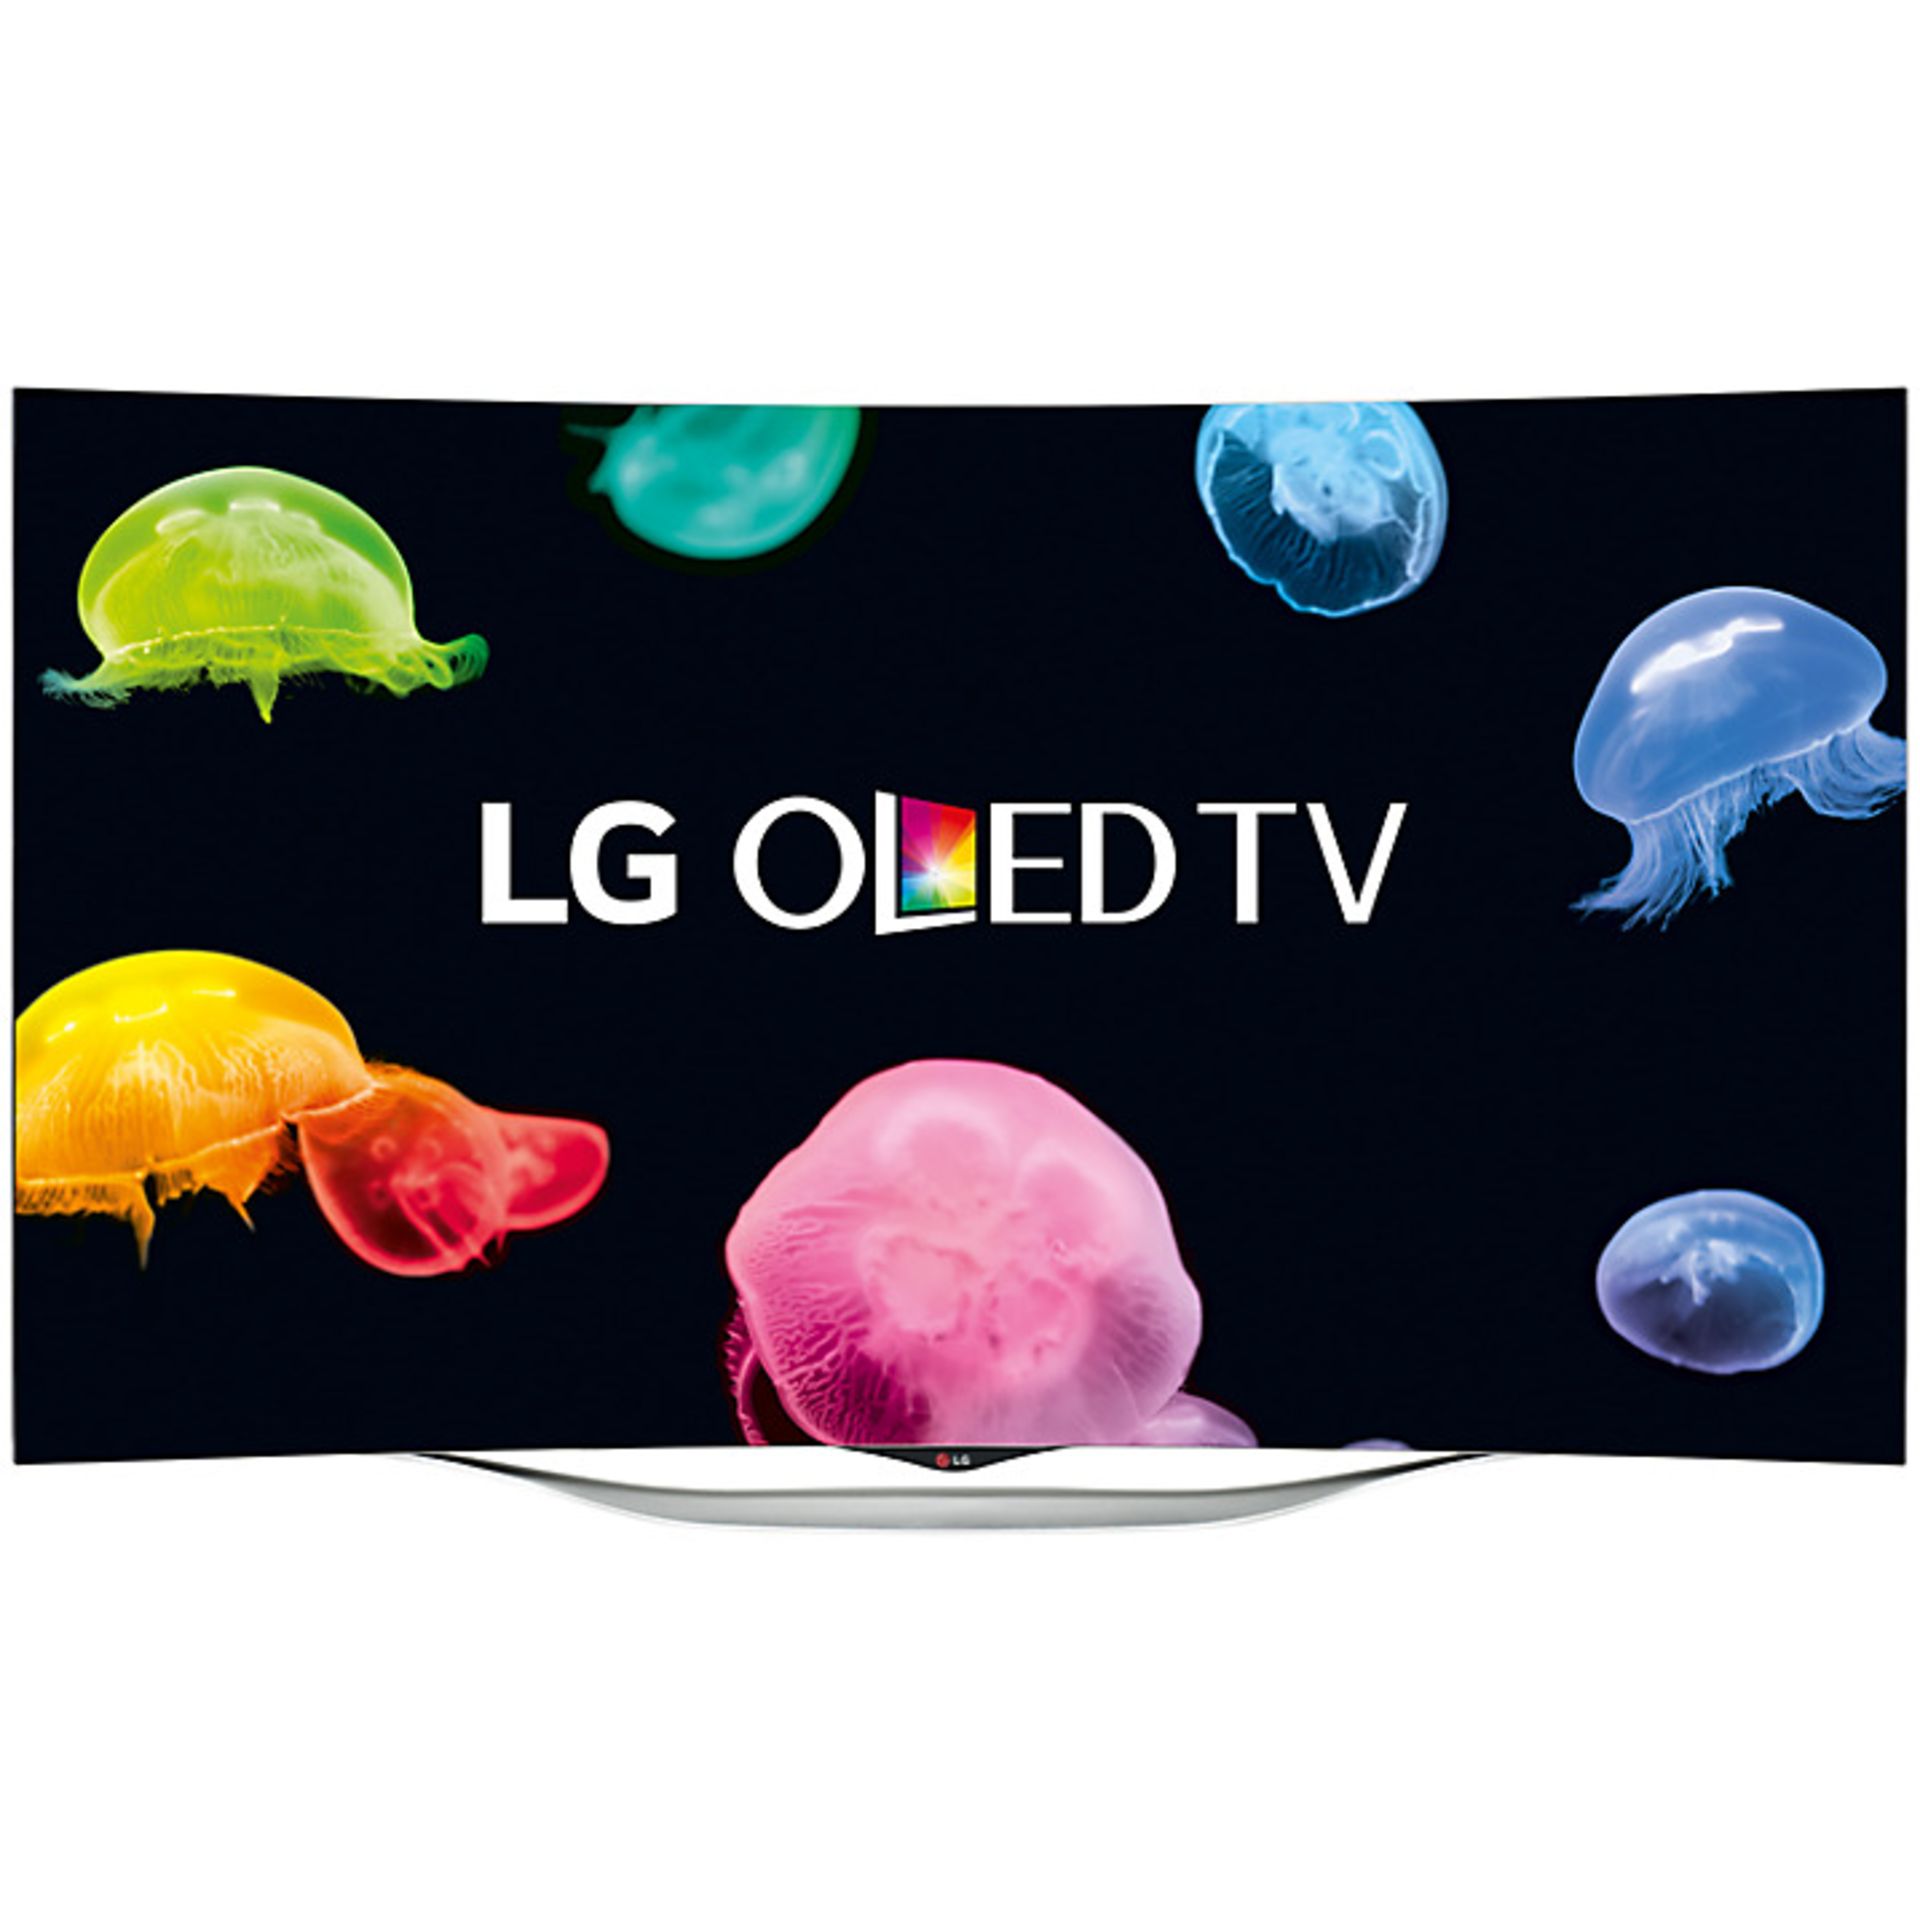 V Grade A 55EC930V 55" LG OLED Curved Smart 3D TV With Freeview HD - RRP: £3699.97 Argos £1799.